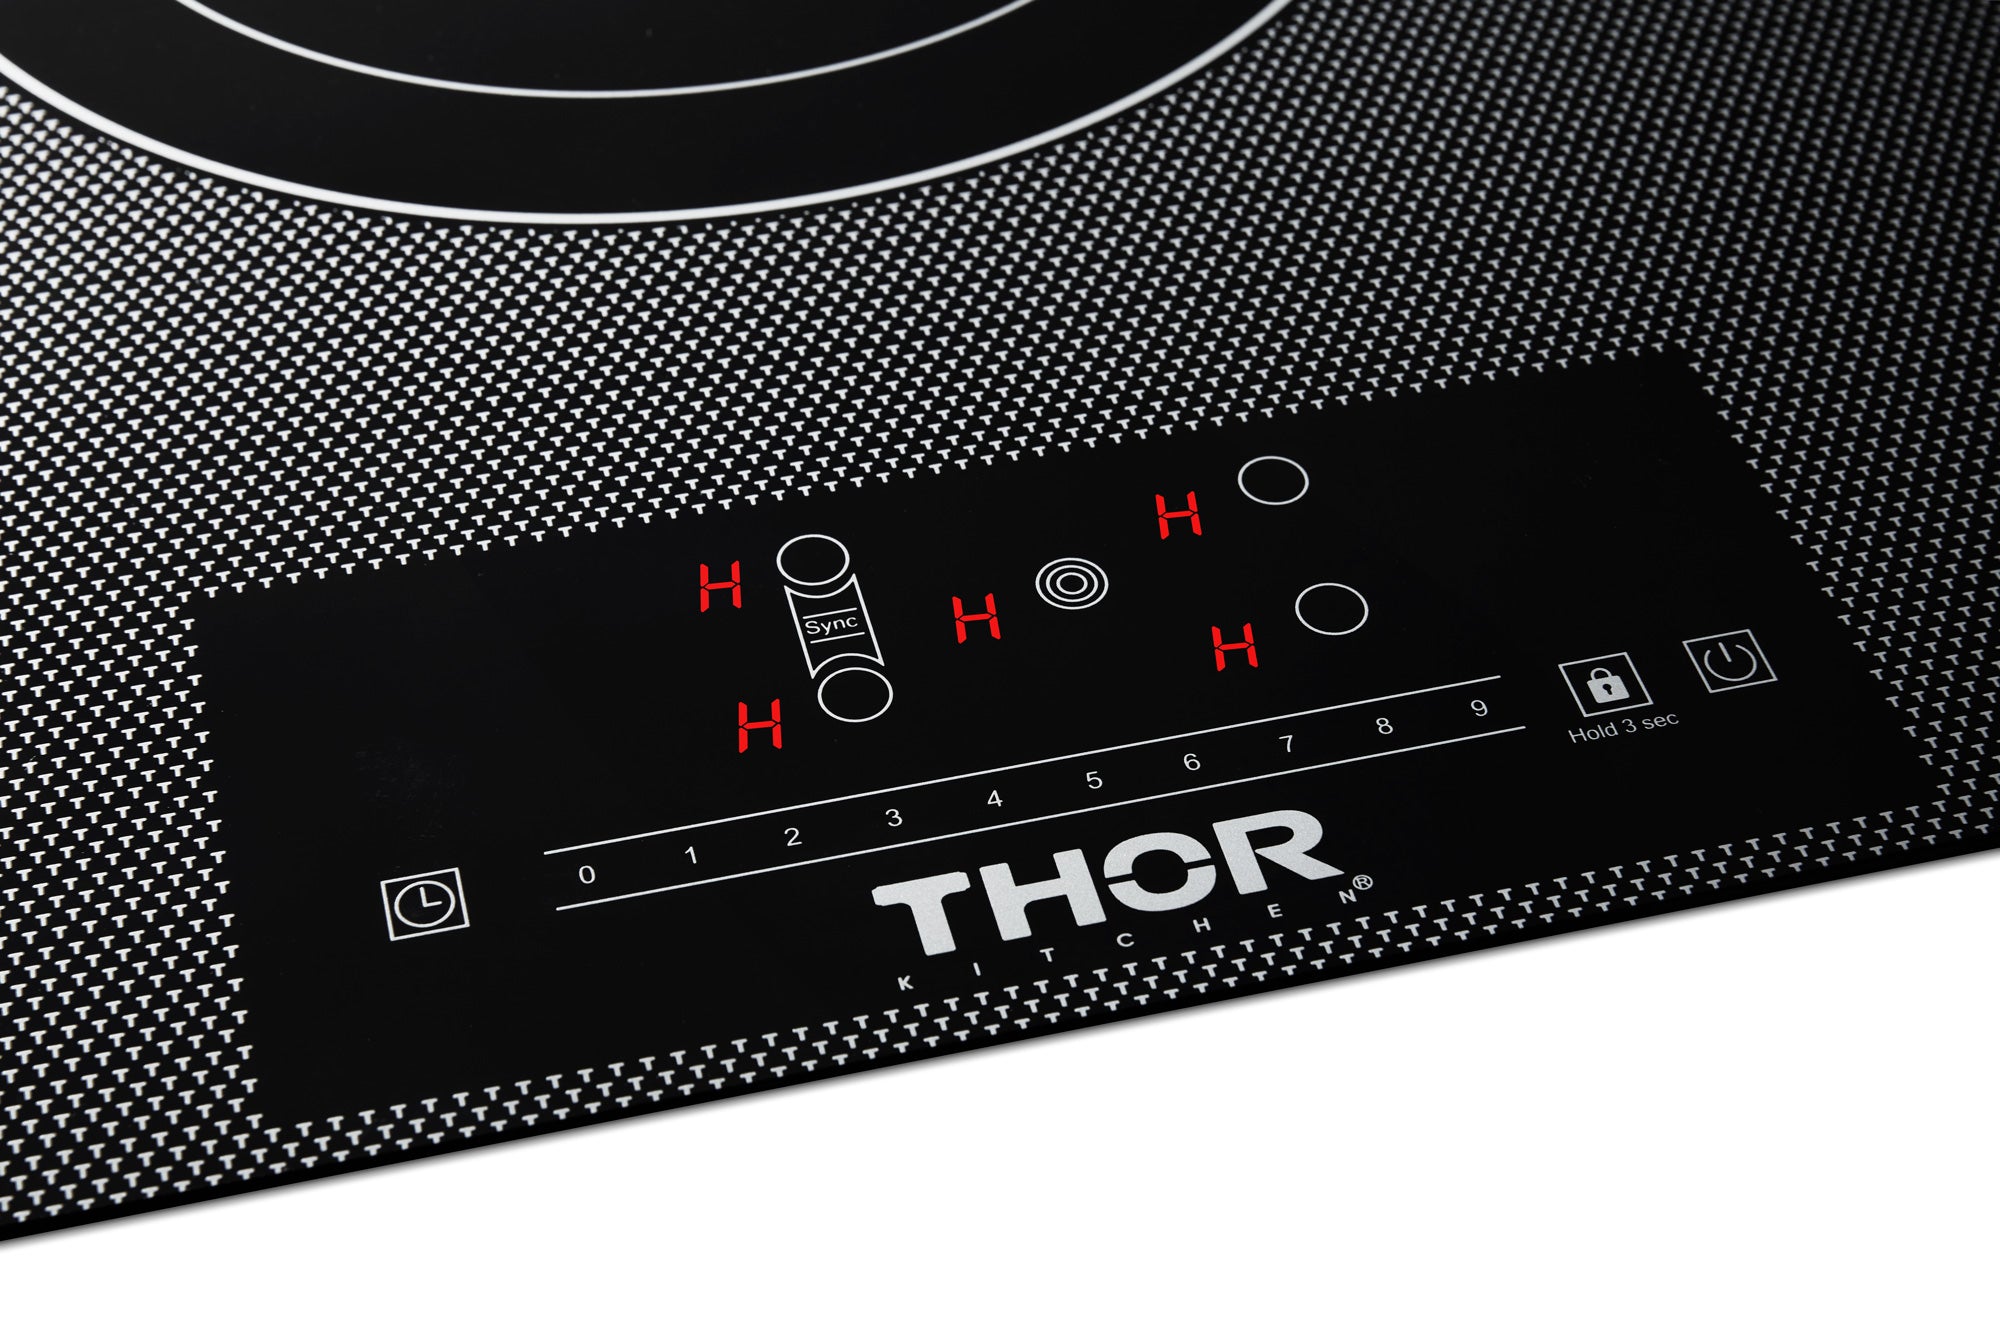 Thor Kitchen 36 Inch Professional Electric Cooktop- Model TEC36 (Renewed)